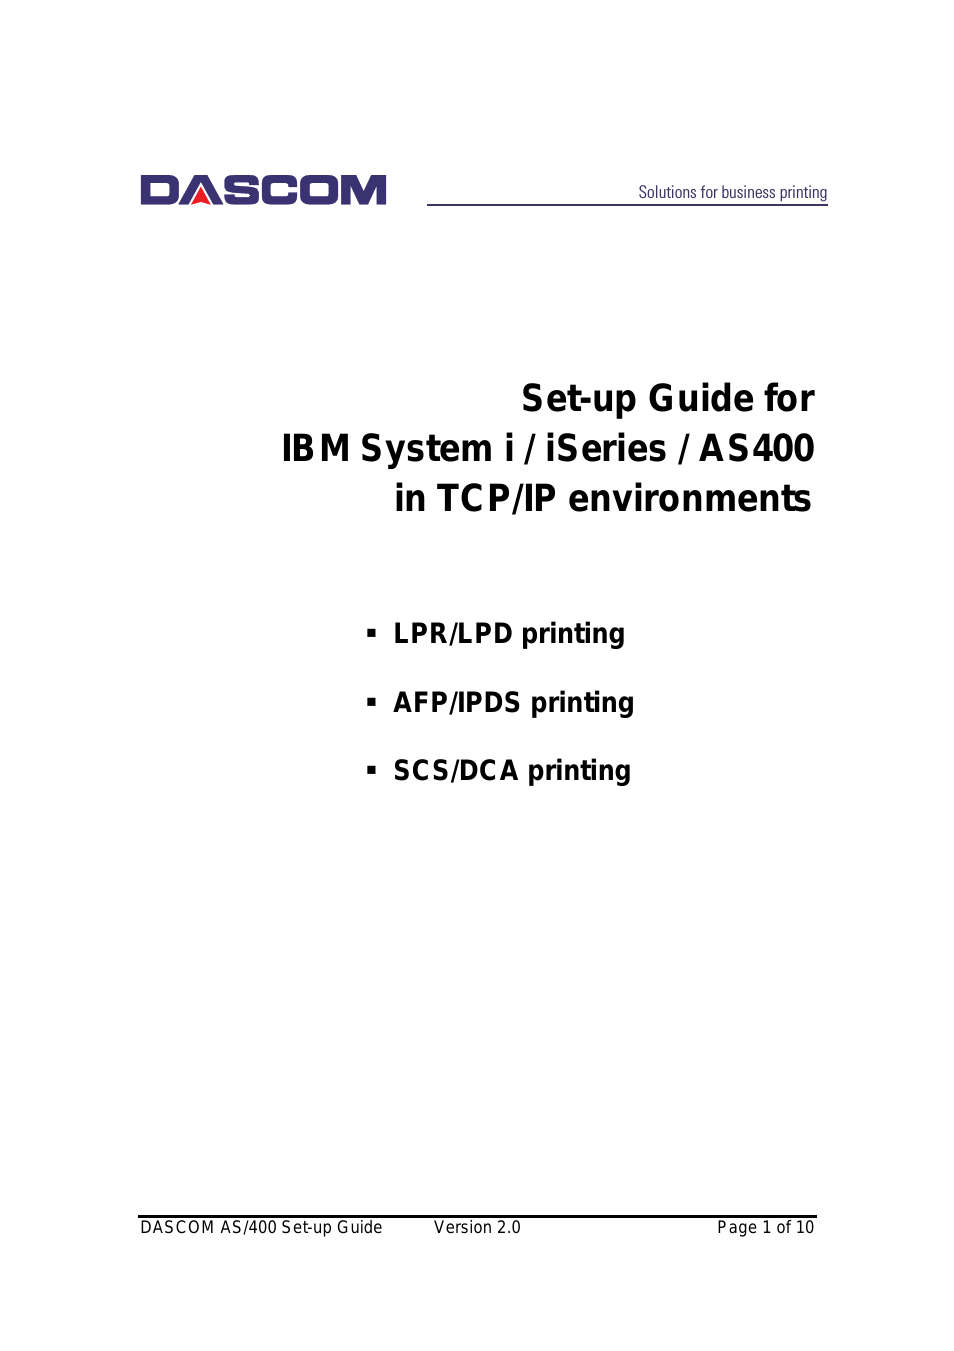 TallyCom III Set-up Guide for IBM System i/iSeries/AS400 in TCP/IP environments